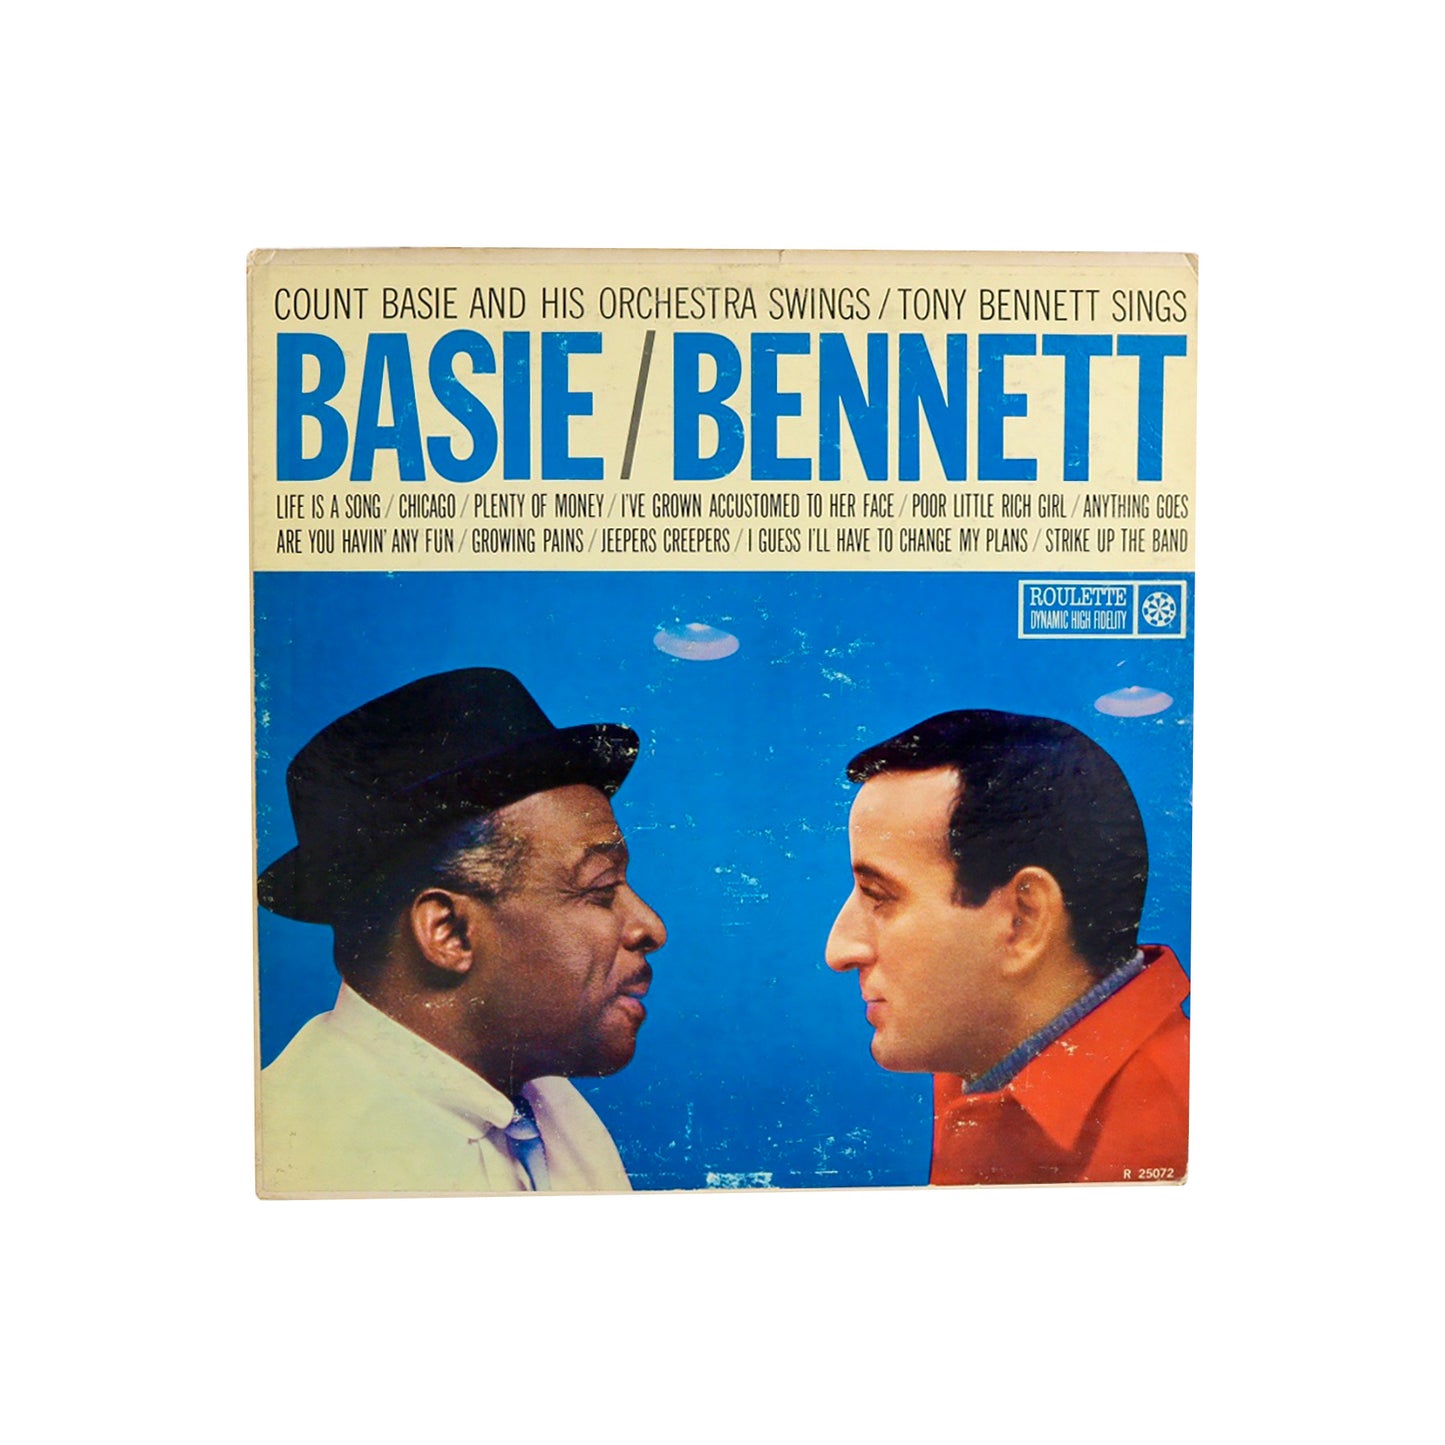 Basie/Bennett, "Count Basie and His Orchestra Swings/Tony Bennett Sings"